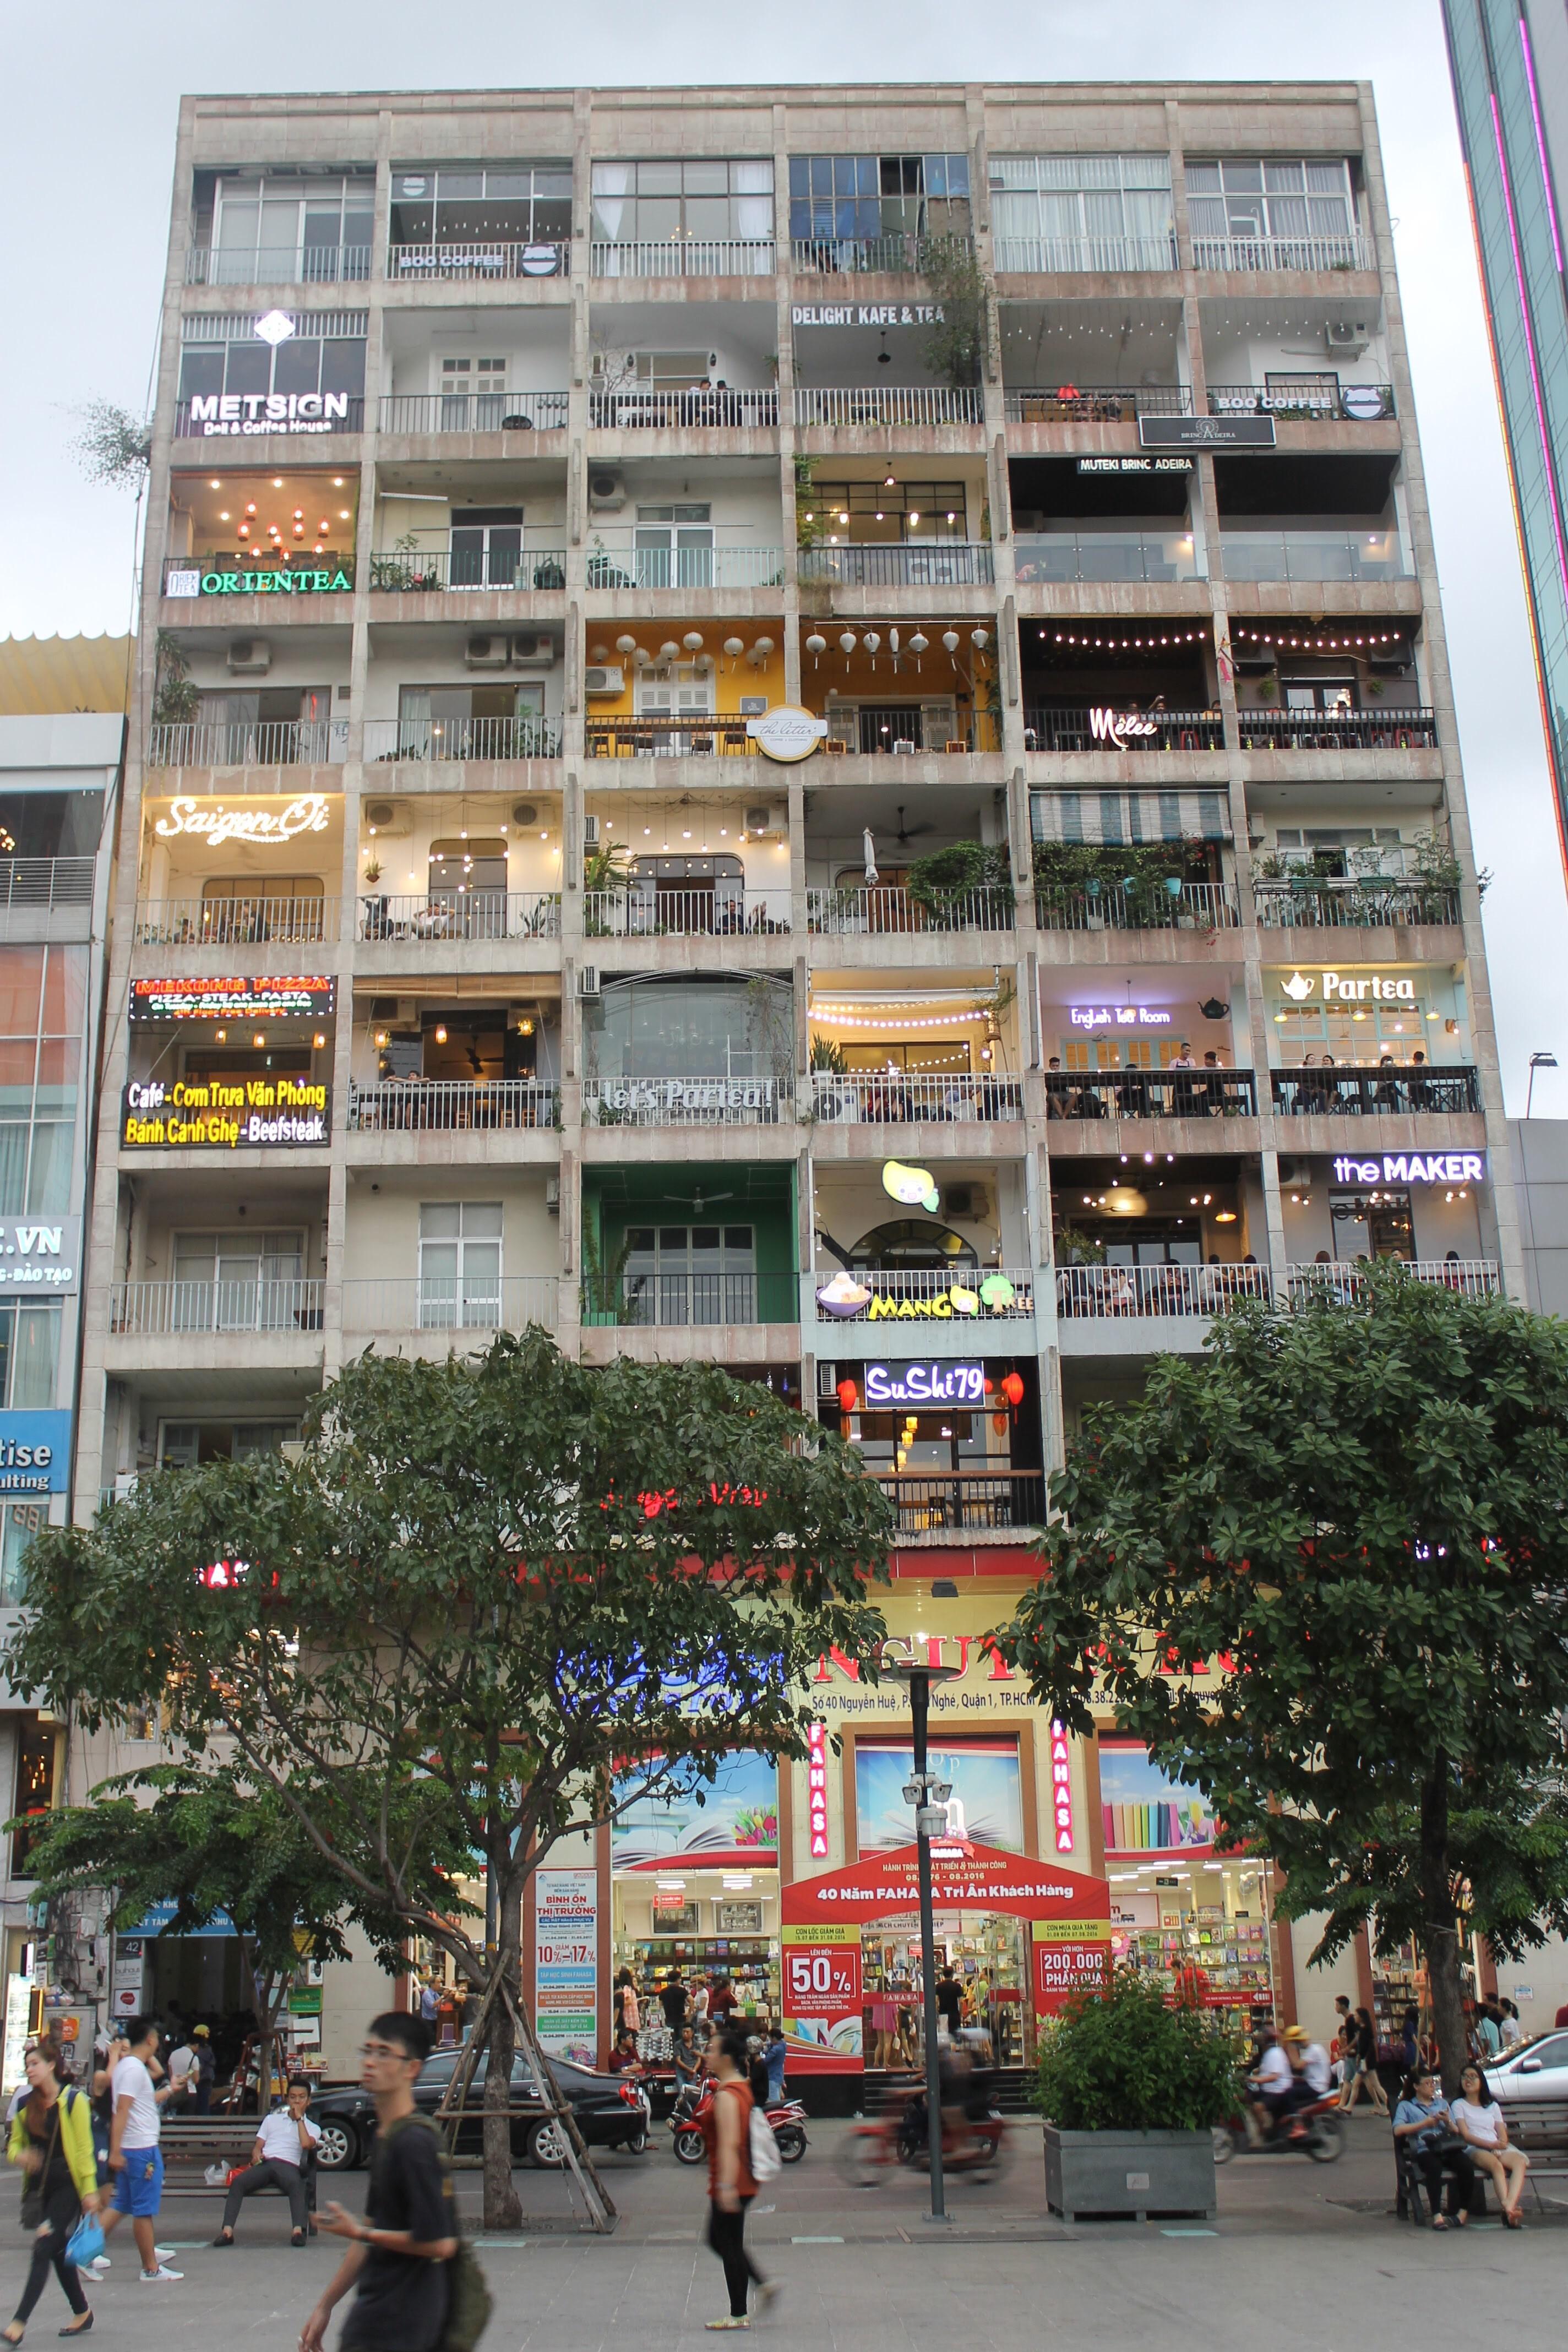 This Vietnamese building is a hub. Each balcony is a different cafe or restaurant